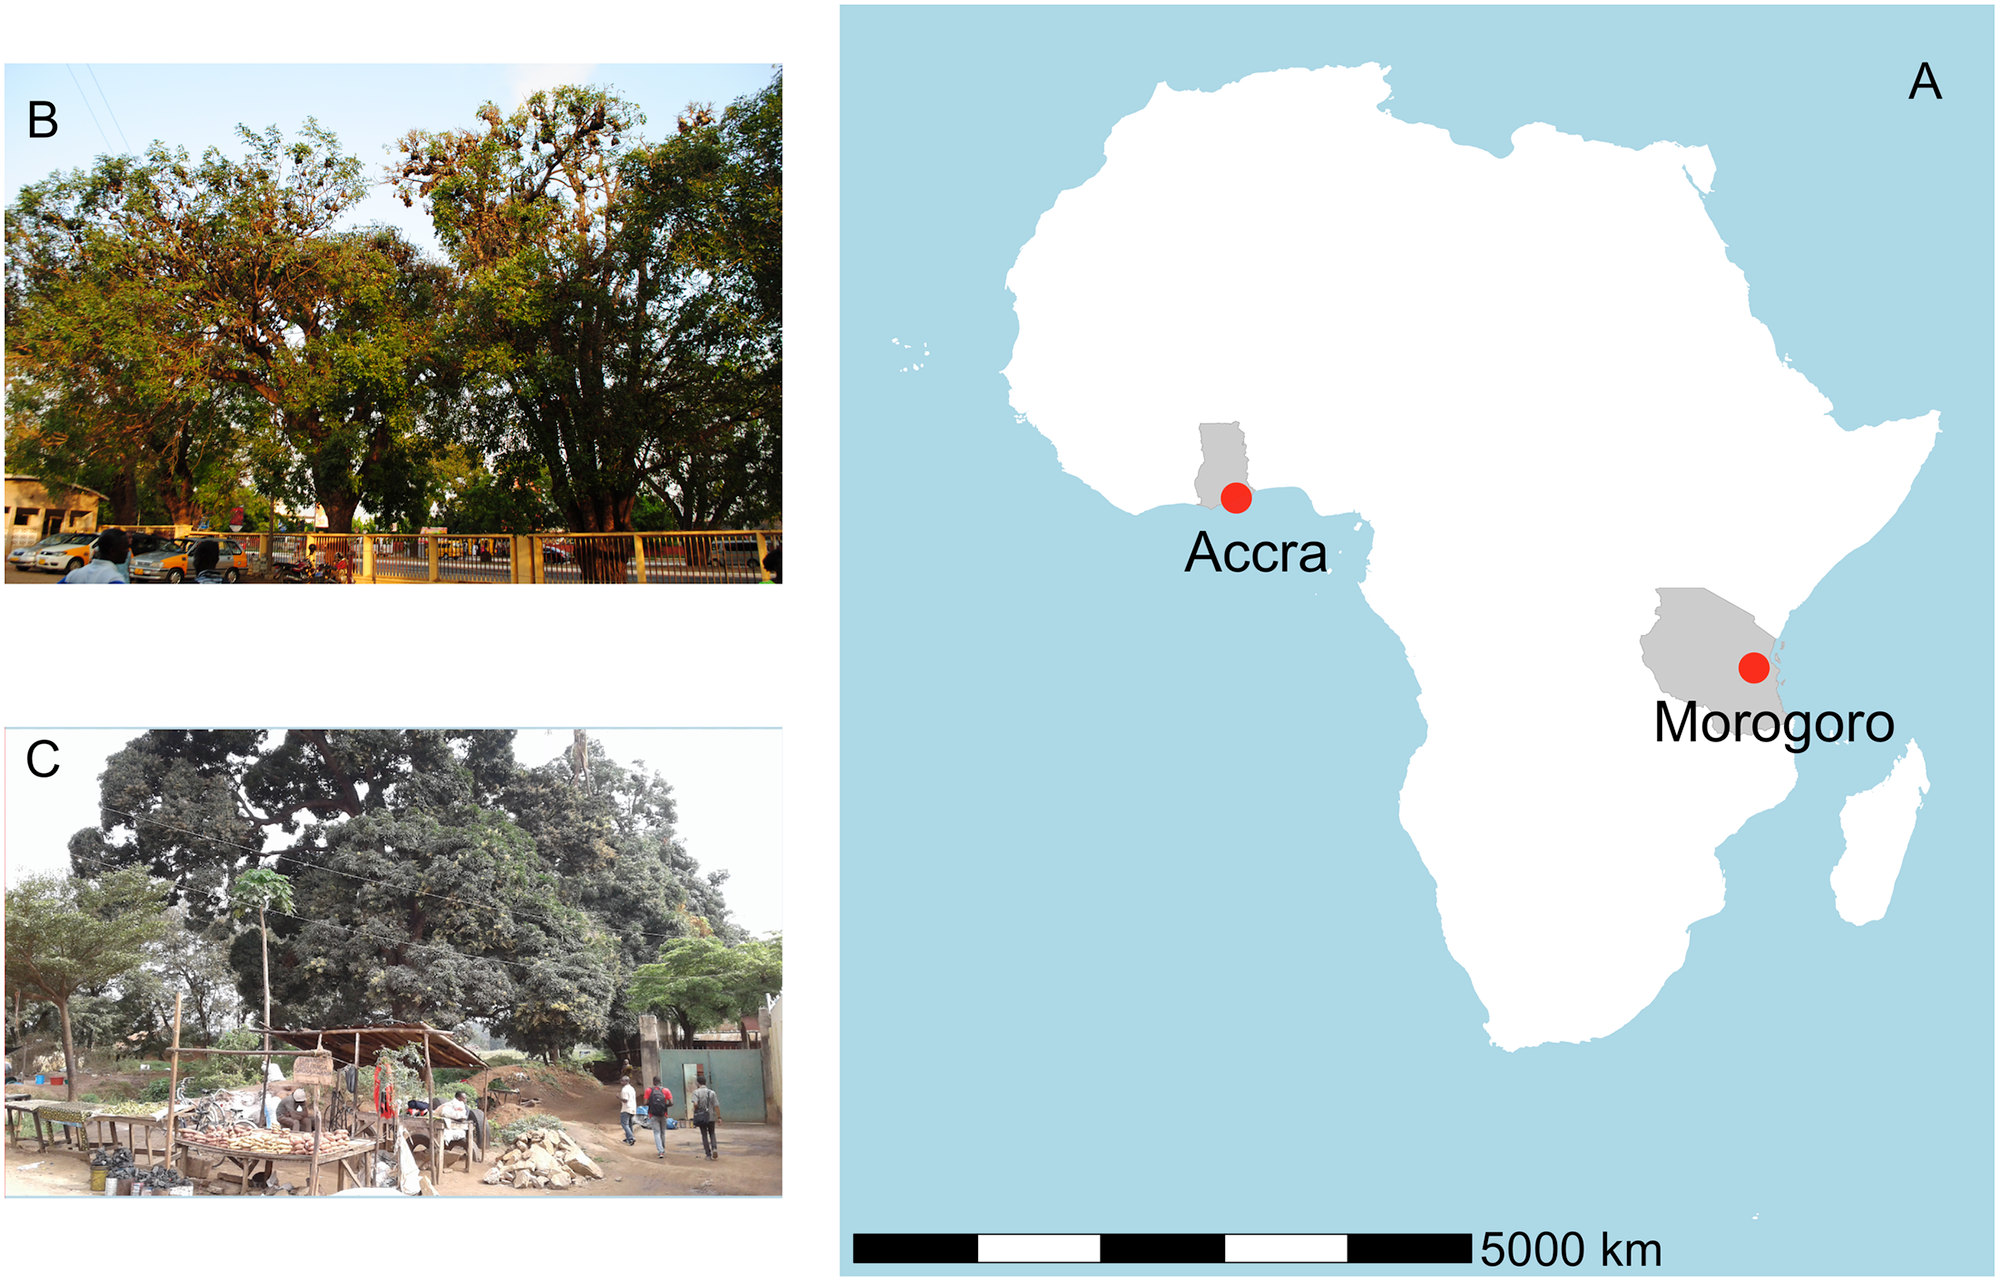 Panel (a) shows the locations of roosts in Africa.  Panel B shows some trees occupied at the 37th Military Hospital in Accra, Ghana, and Panel C shows bats roosting at Kikundi Market in Morogoro, Tanzania.